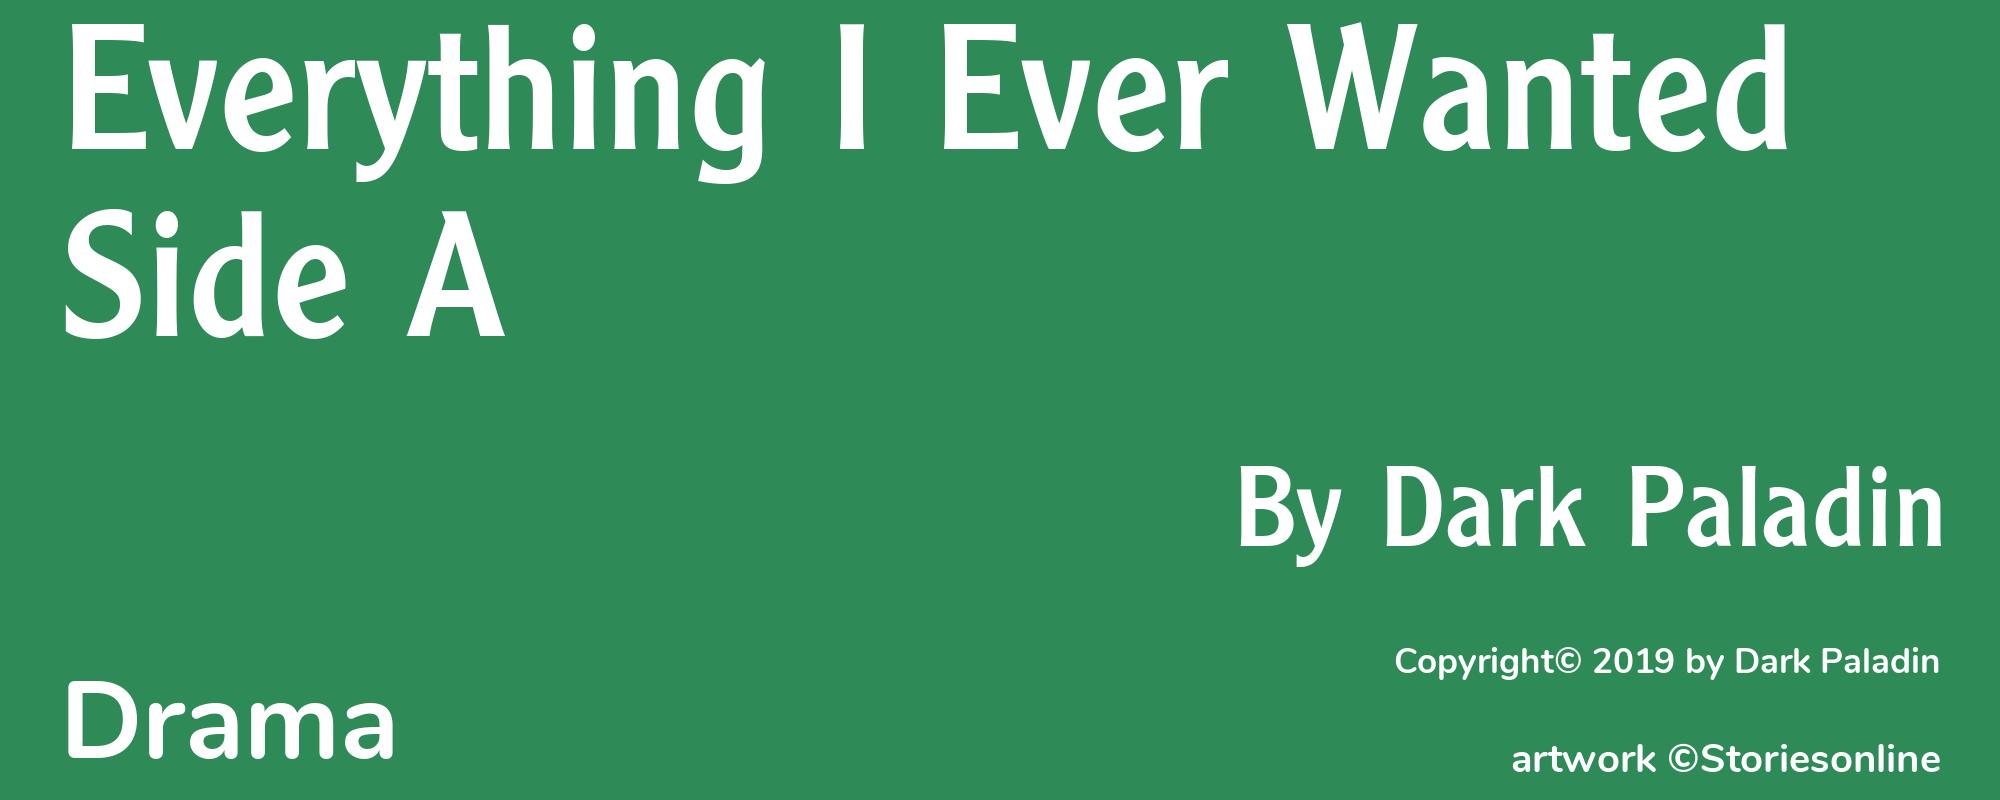 Everything I Ever Wanted Side A - Cover